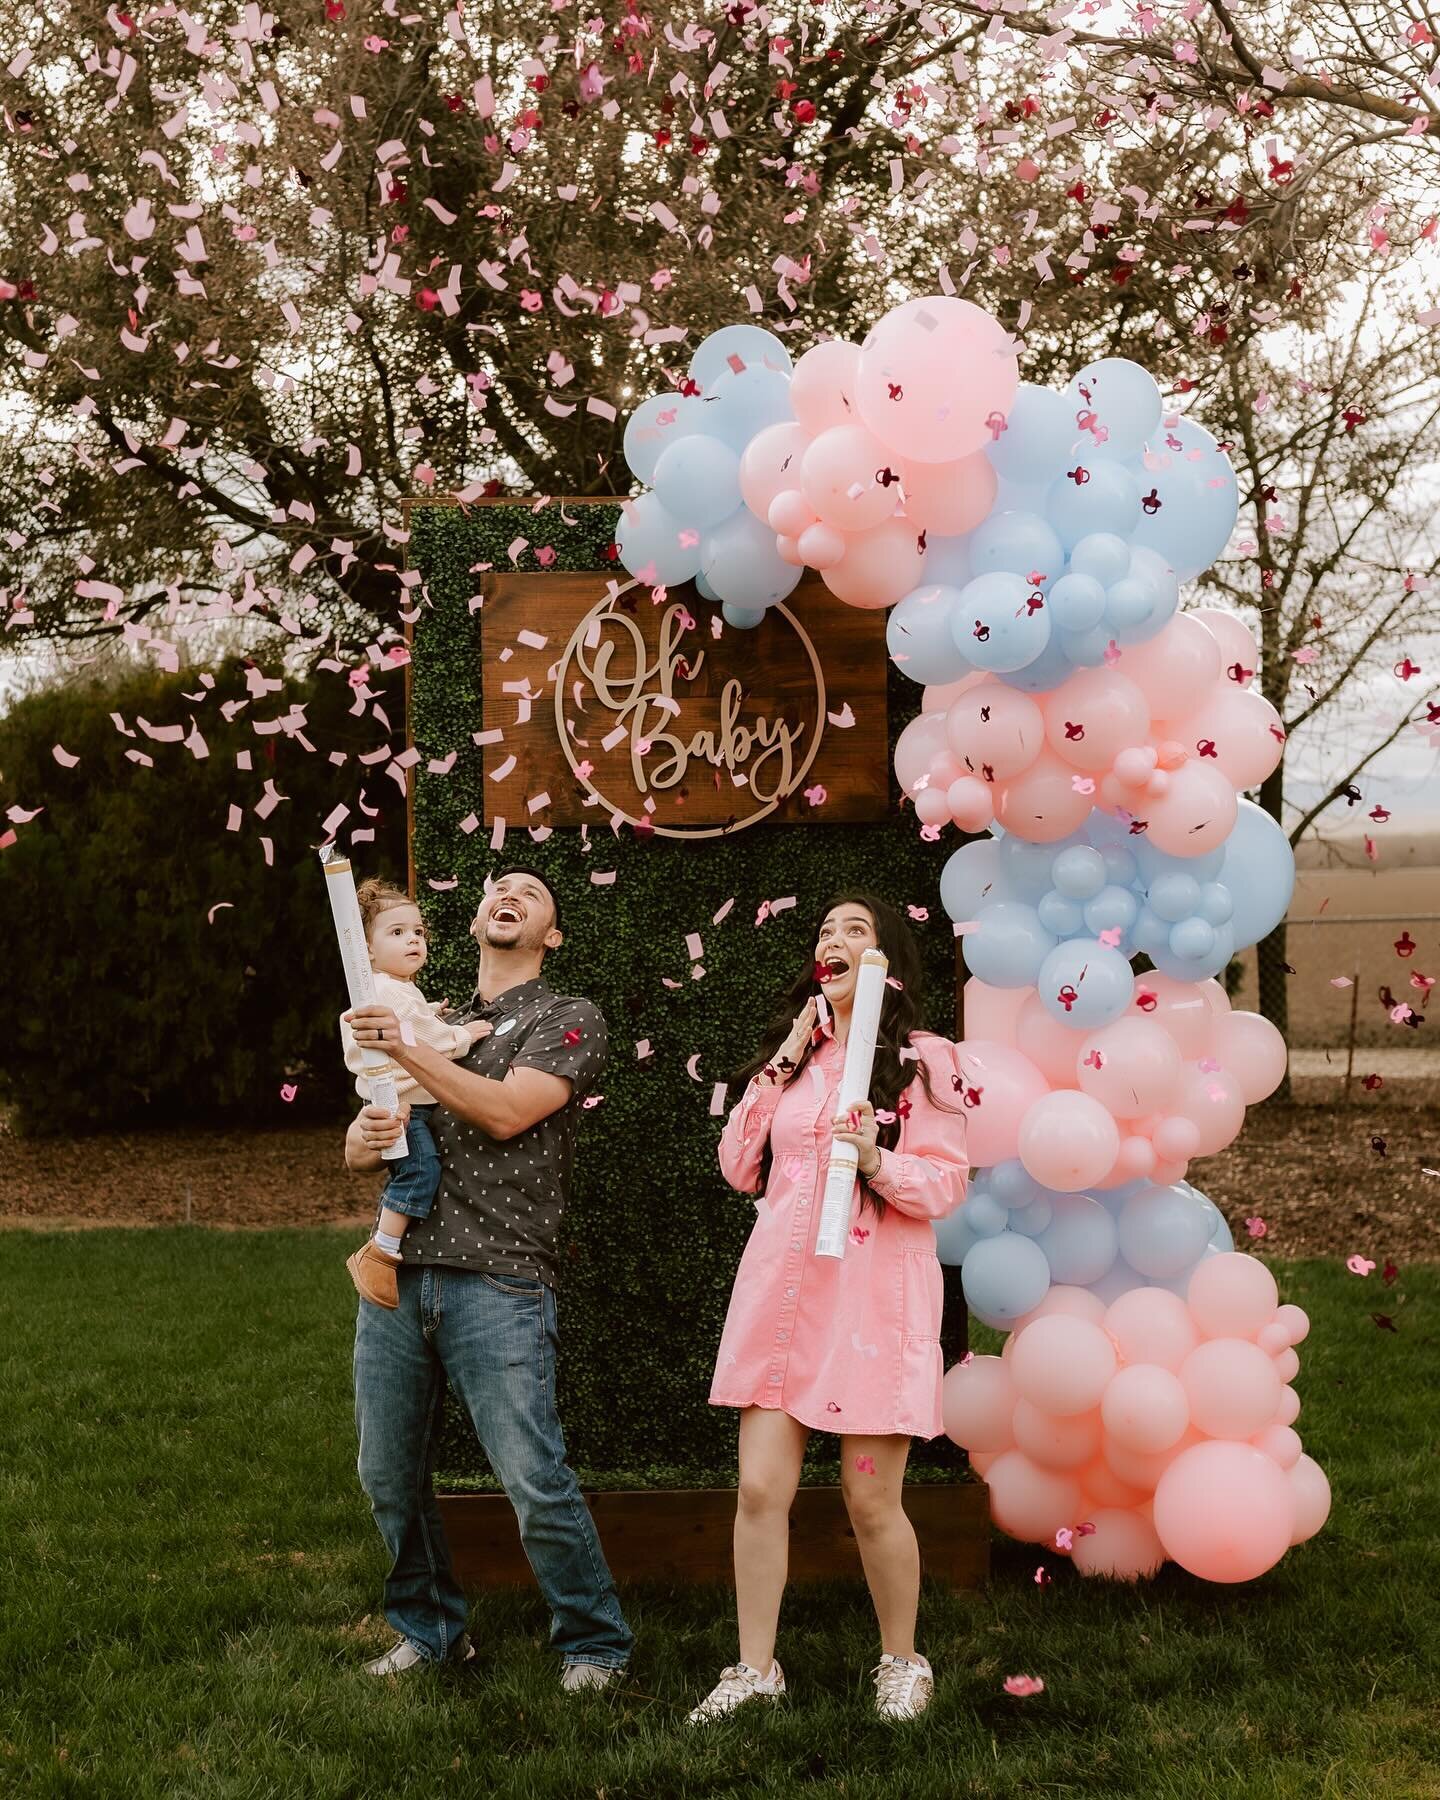 Baby GIRL Filippini is so so loved!! 🎀🎀🎀
Almost 13 weeks with my miracle baby! We are so overjoyed and excited to be giving Ellena a sister!! I pray these two become the best of friends and spend forever building the sweetest relationship the worl